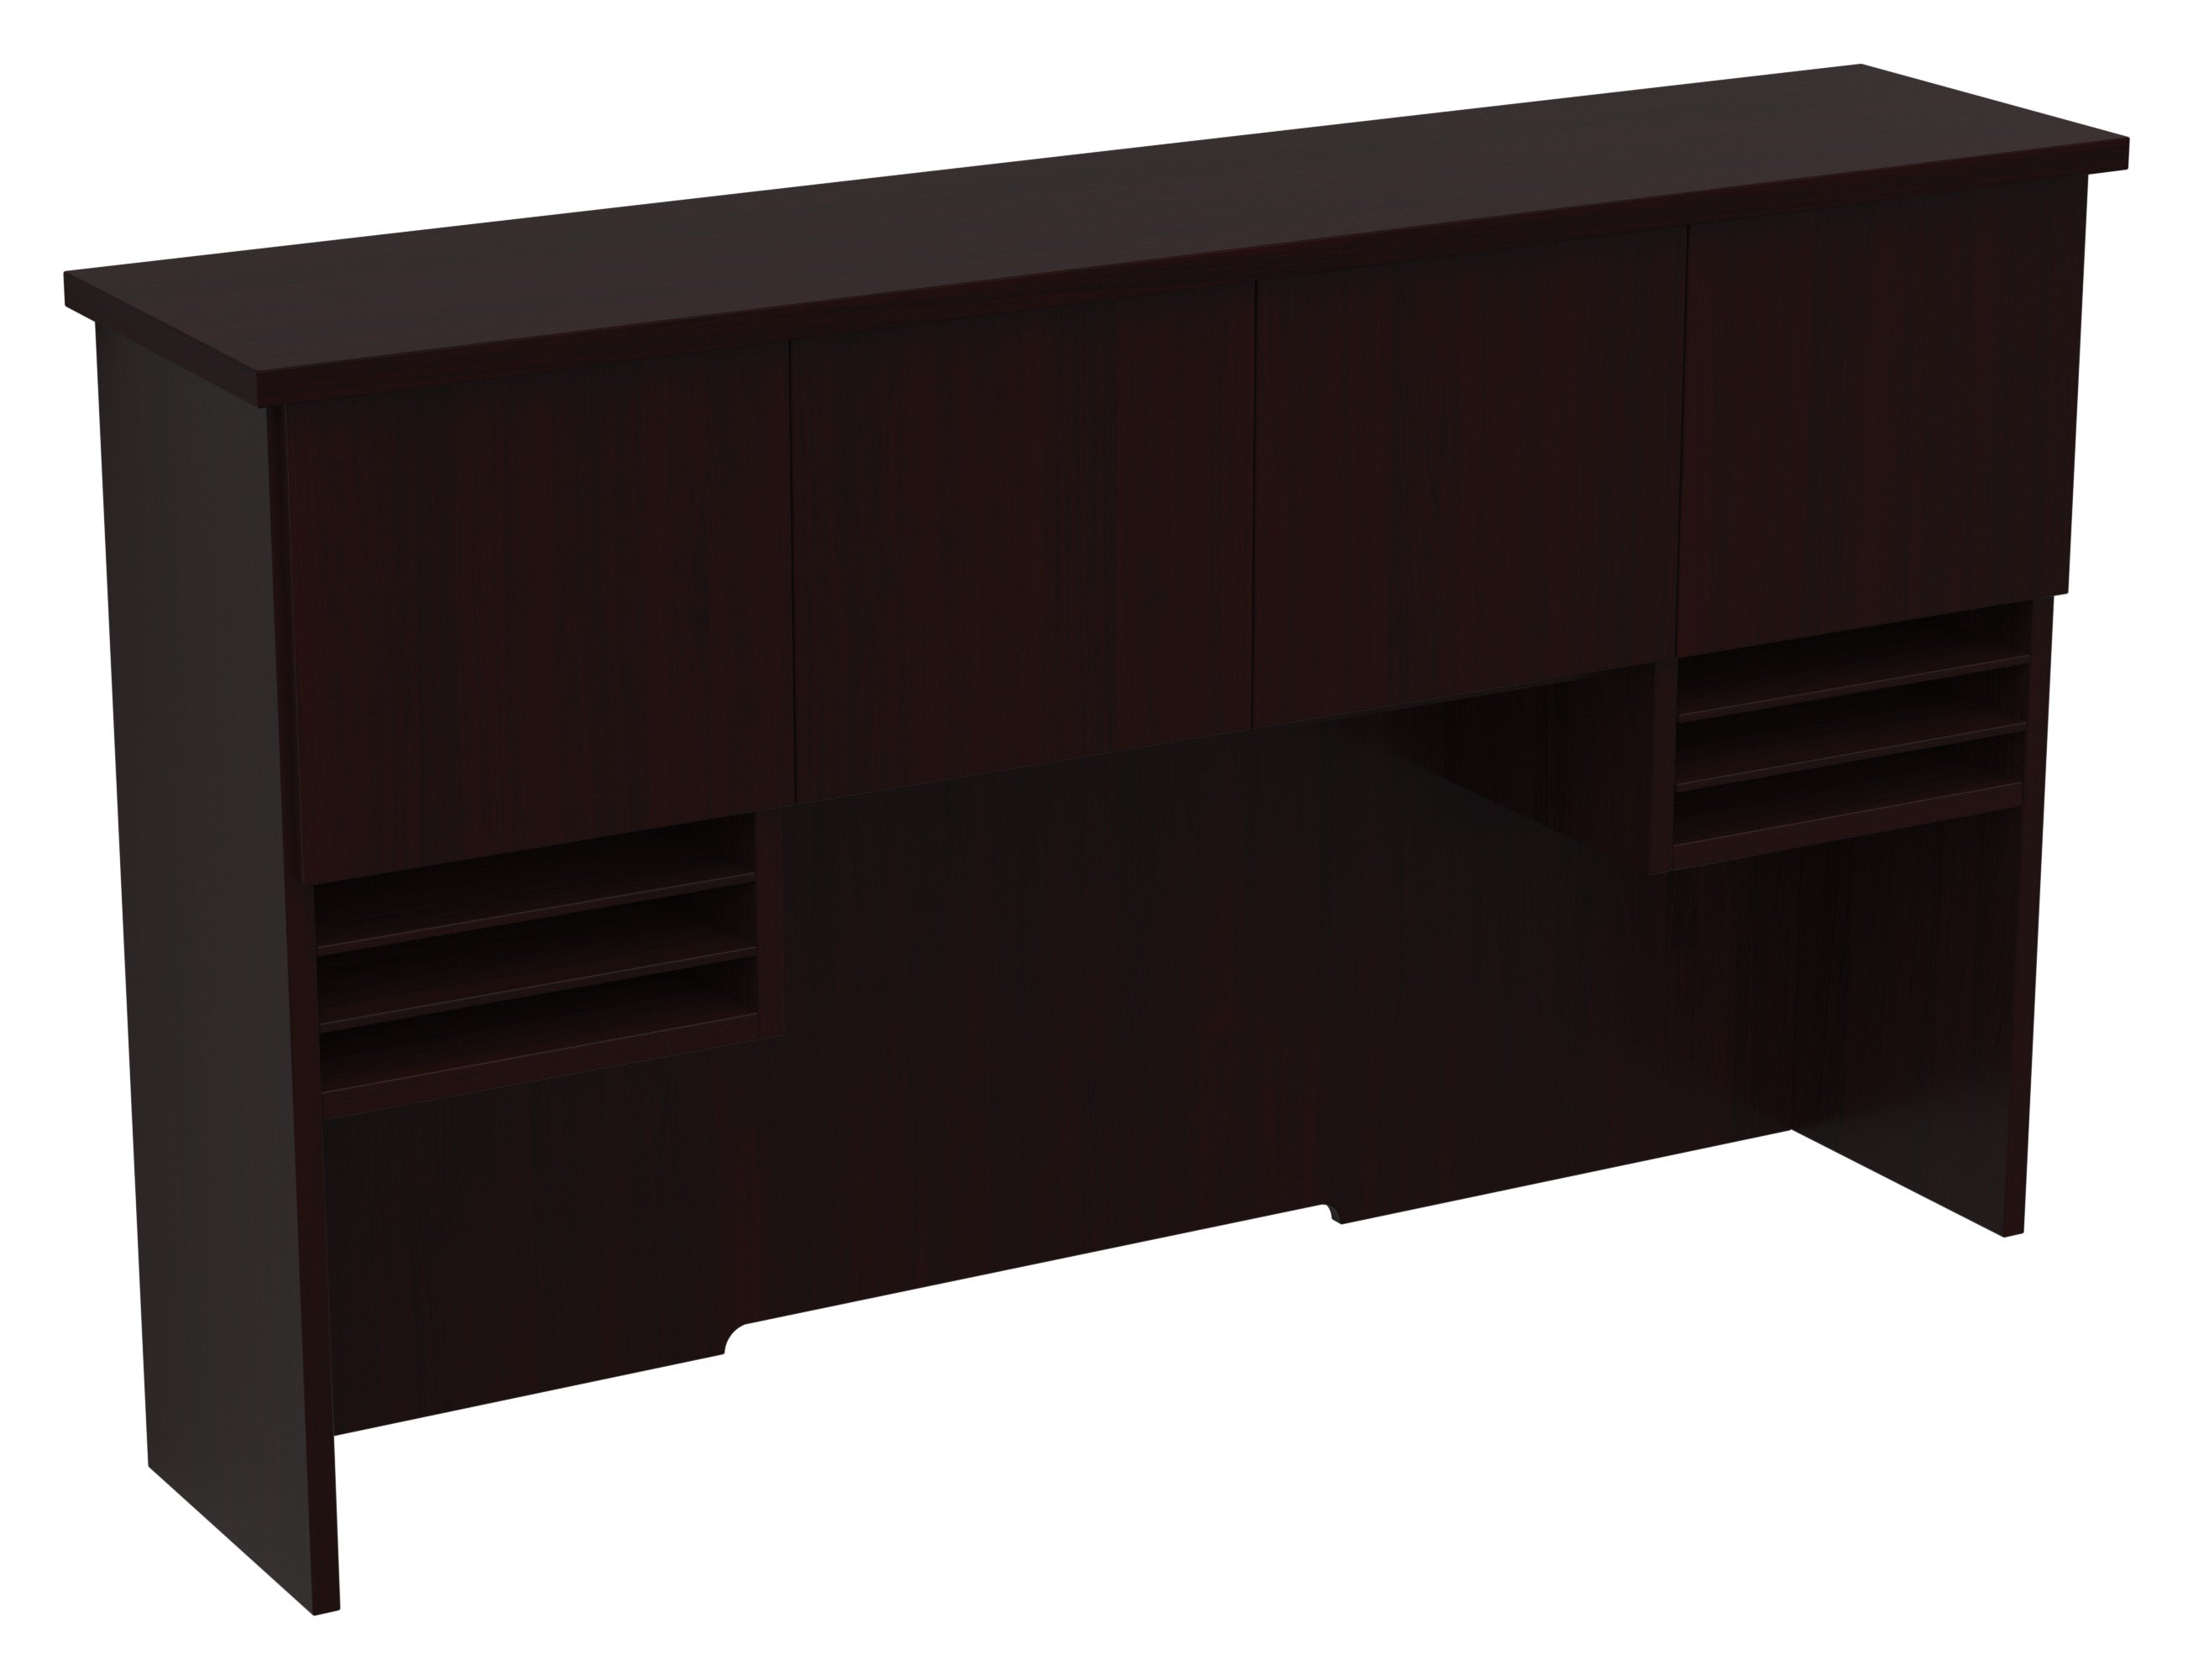 TUX-44 - Tuxedo Series Hutch with Wood Doors, by OSP